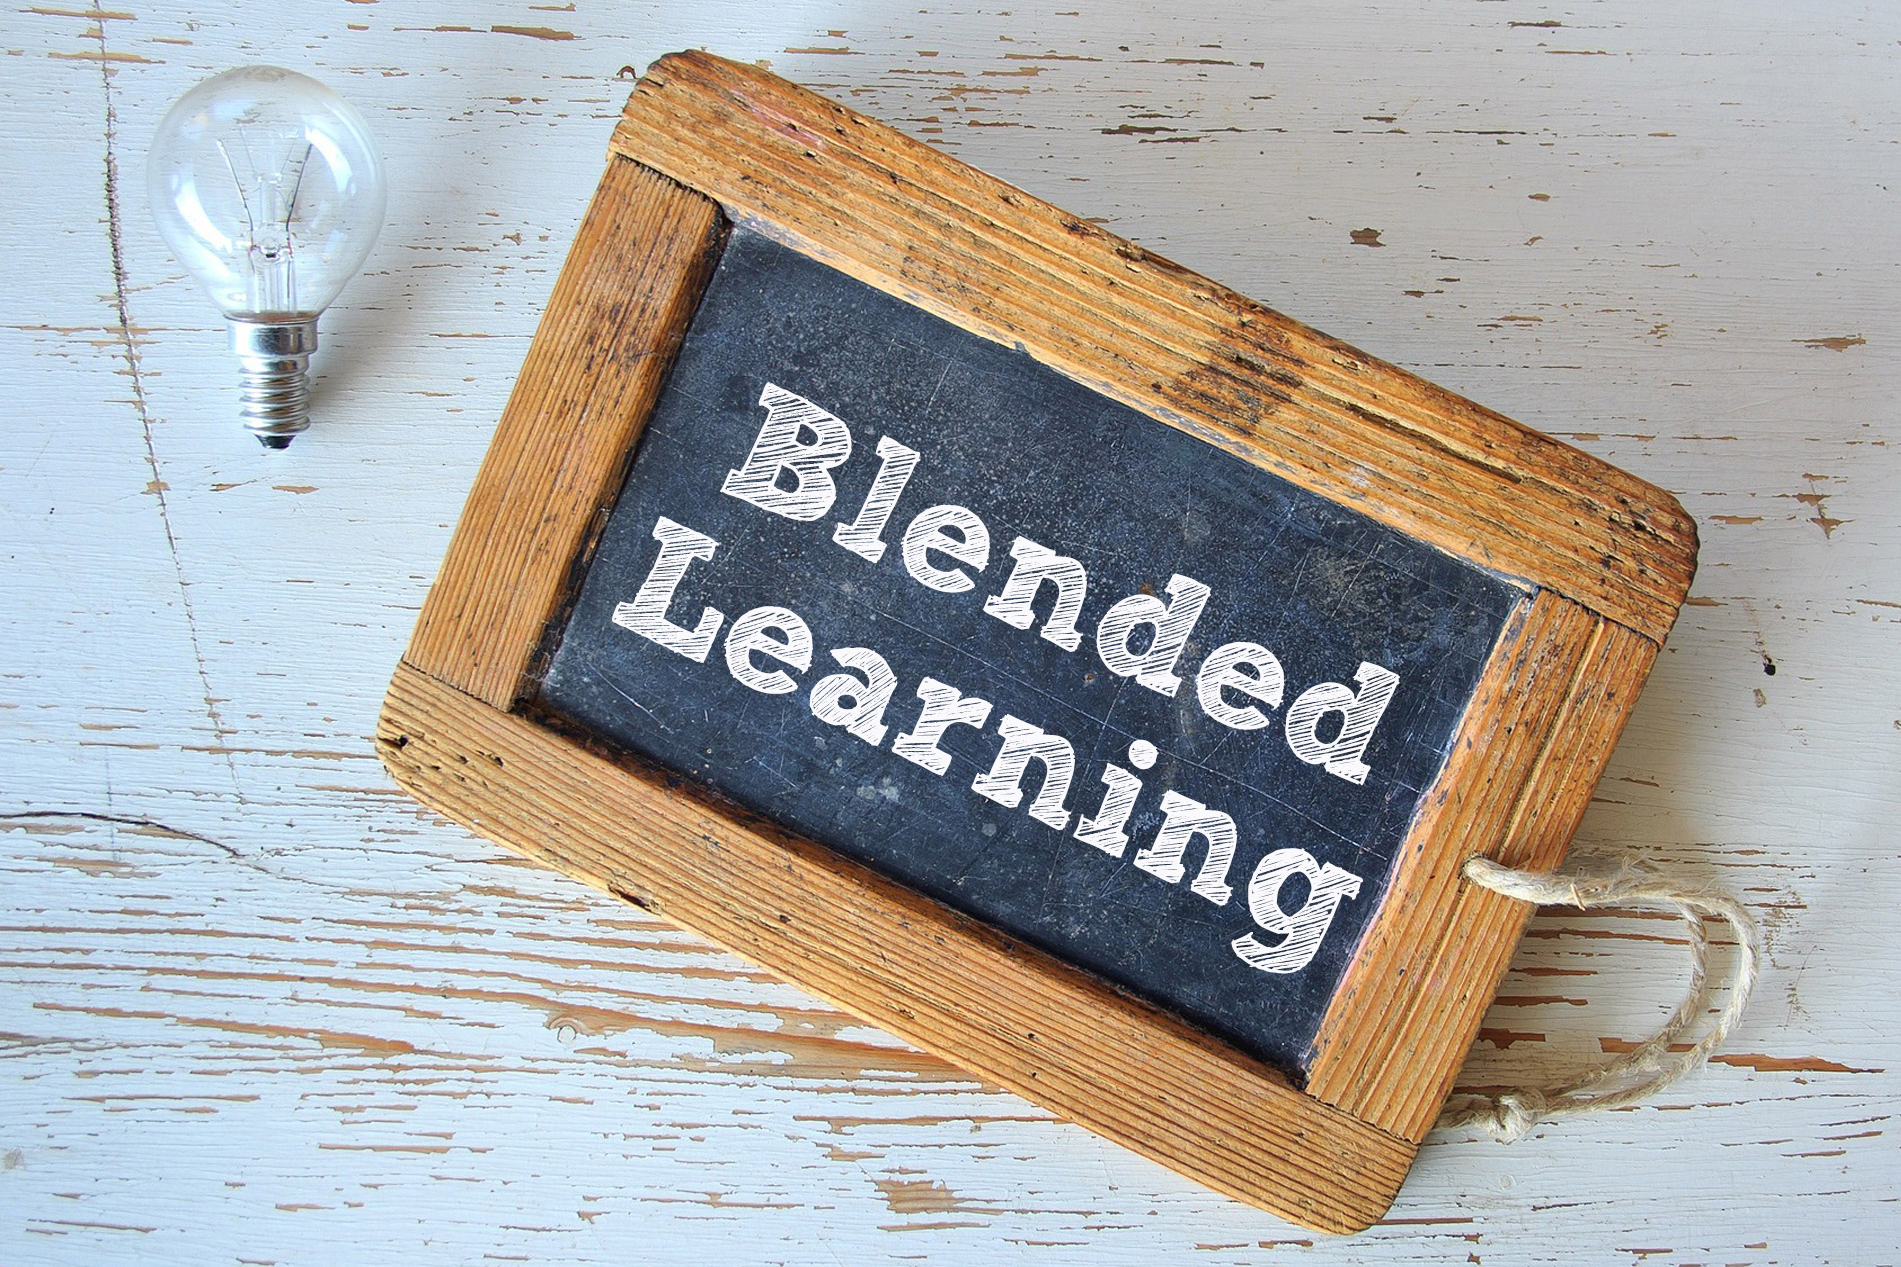 You are currently viewing Ein tolles Studium im Blended Learning-Format. Aber was ist Blended Learning eigentlich?